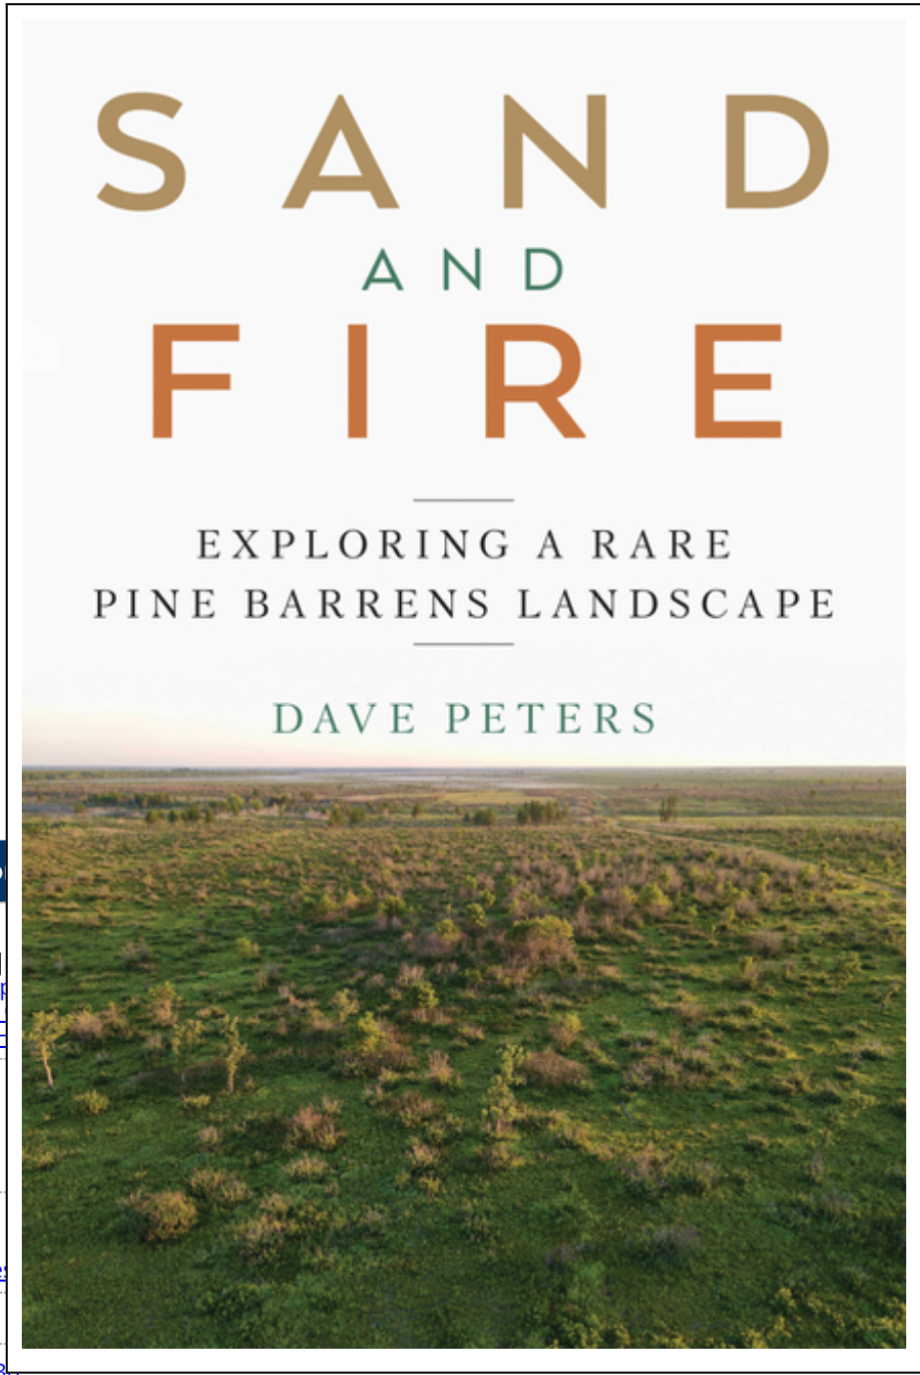 Sand and Fire: Exploring a Rare Pine Barrens Landscape  by Dave Peters